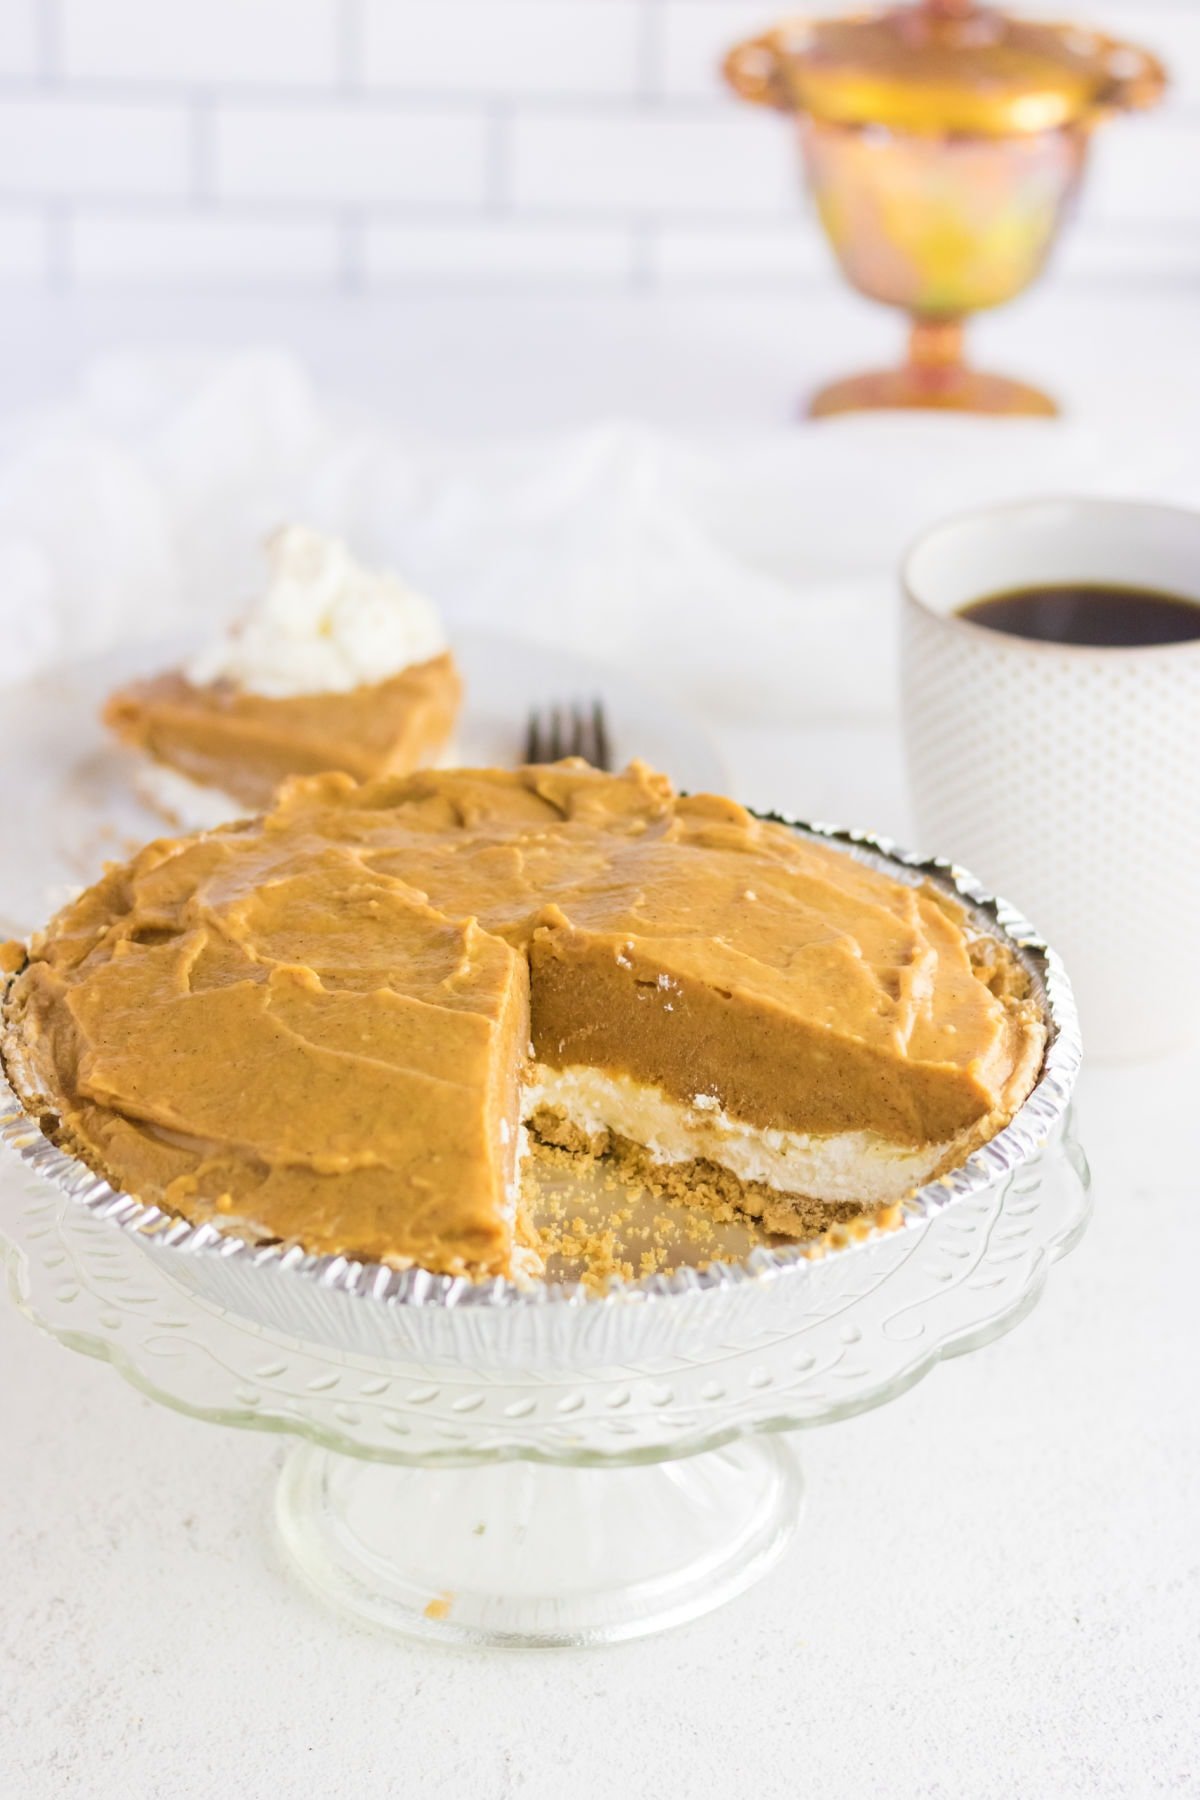 A pumpkin pie with a slice removed to show the cream cheese and pumpkin layers.